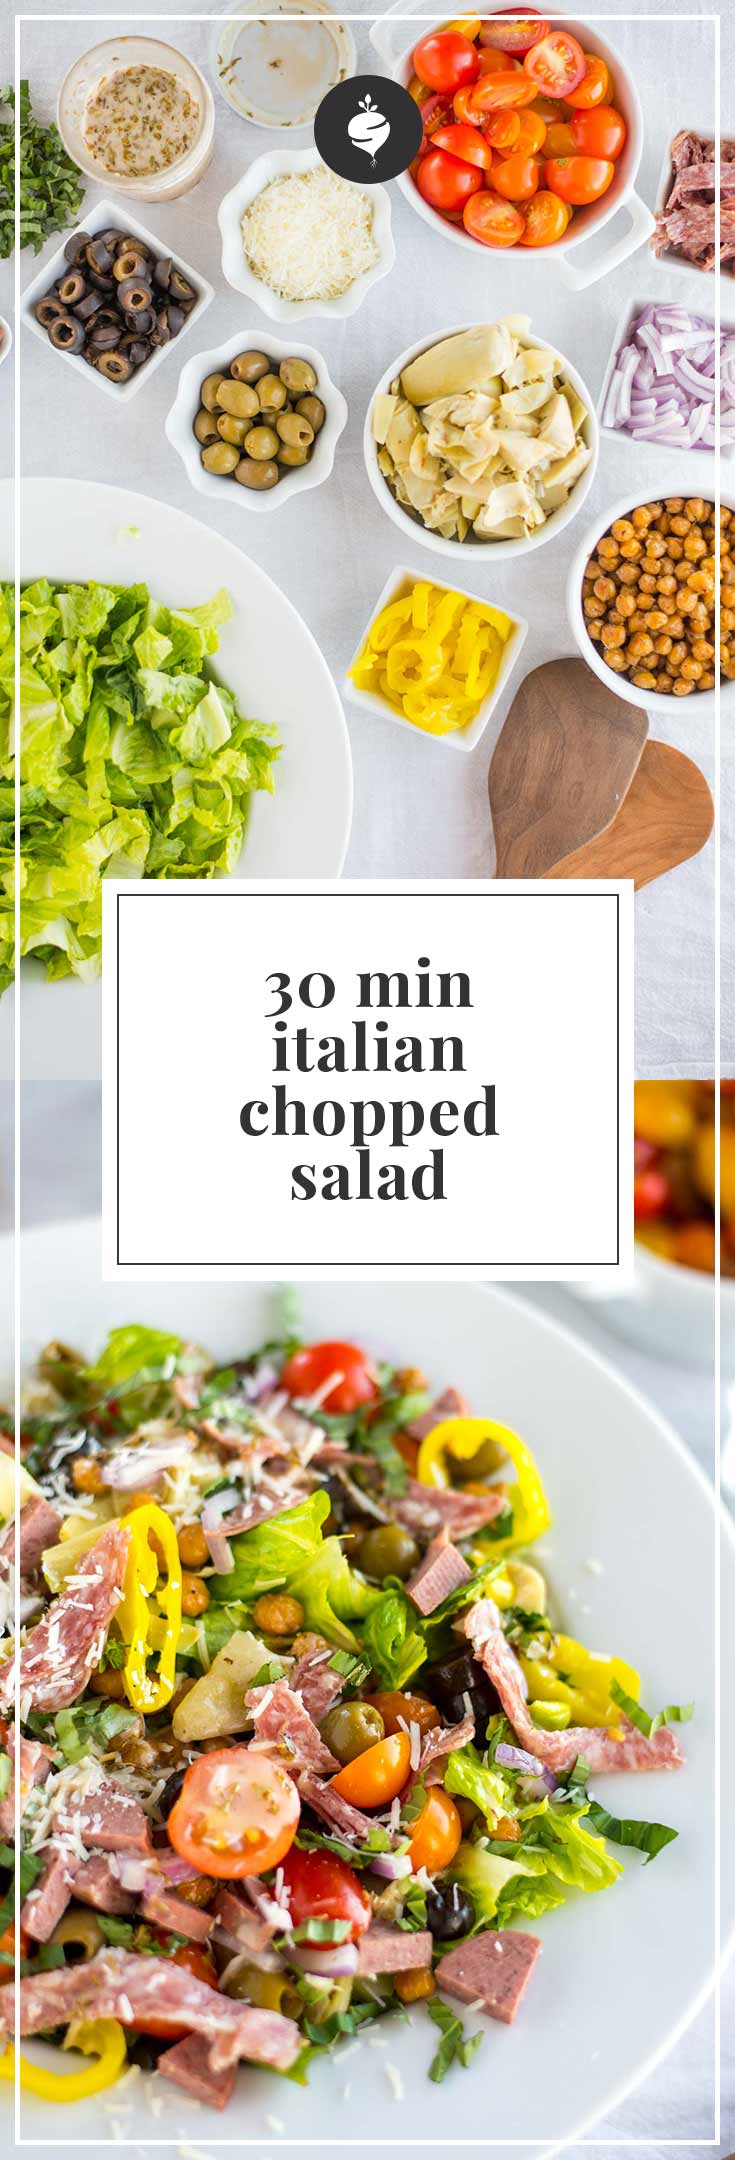 Looking for an easy and clean weeknight dinner? Look no further than this easy, family friendly Italian chopped salad.